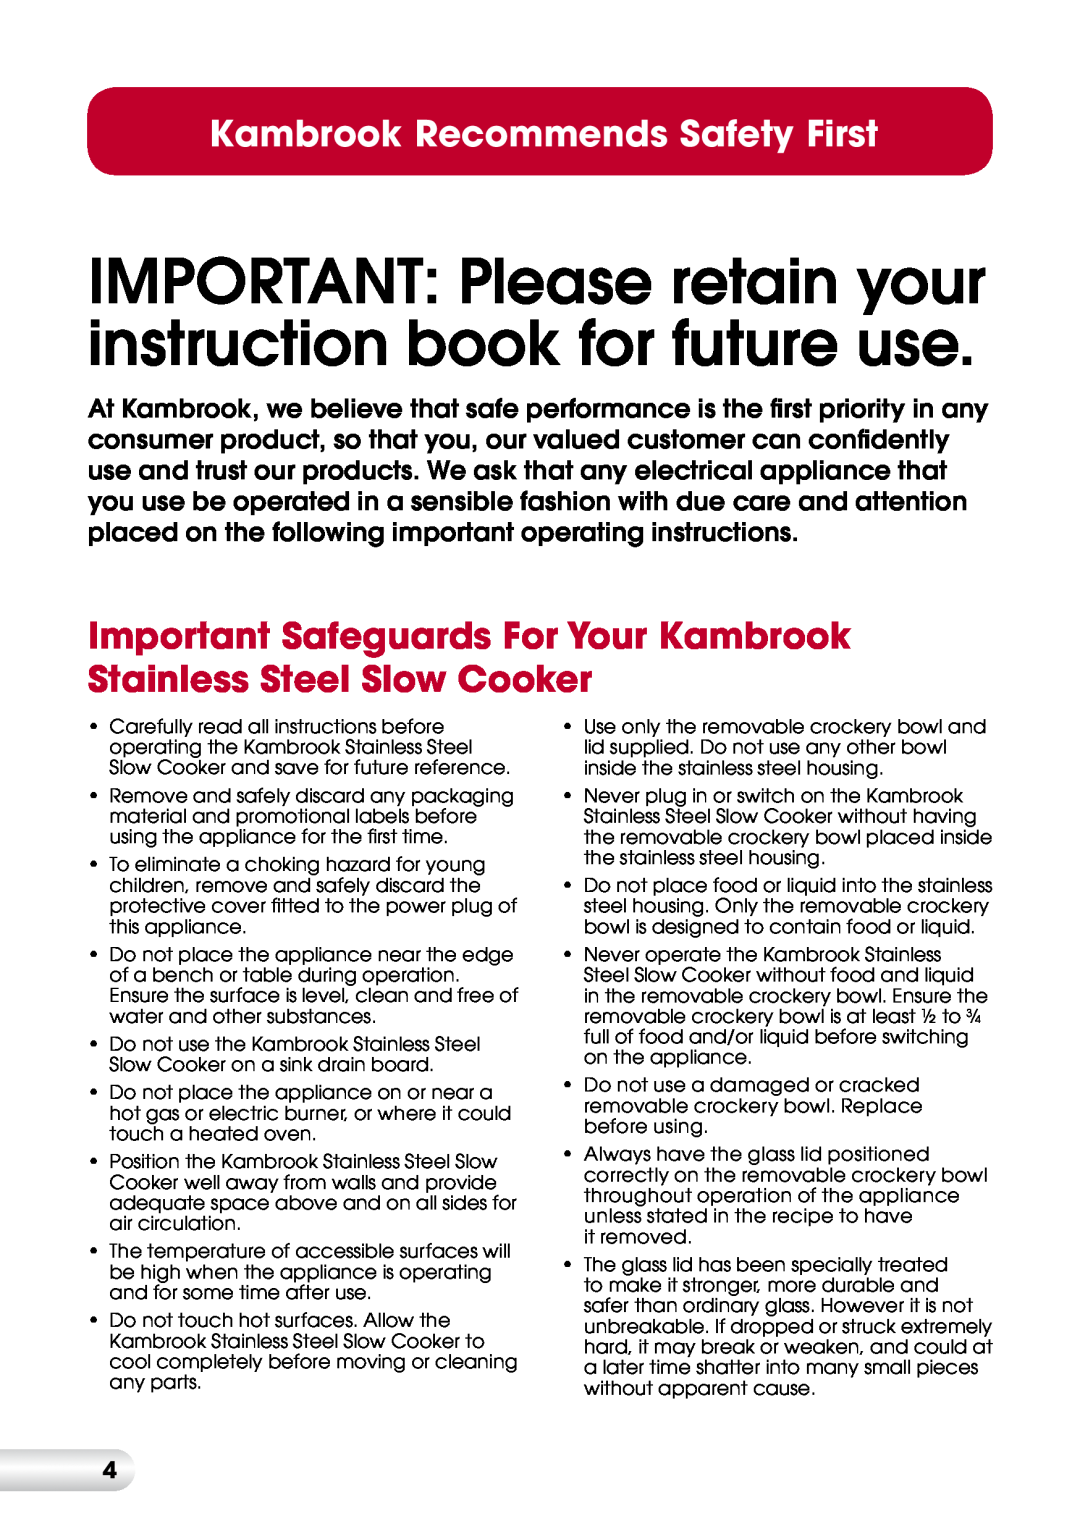 Kambrook KSC360 manual Kambrook Recommends Safety First 